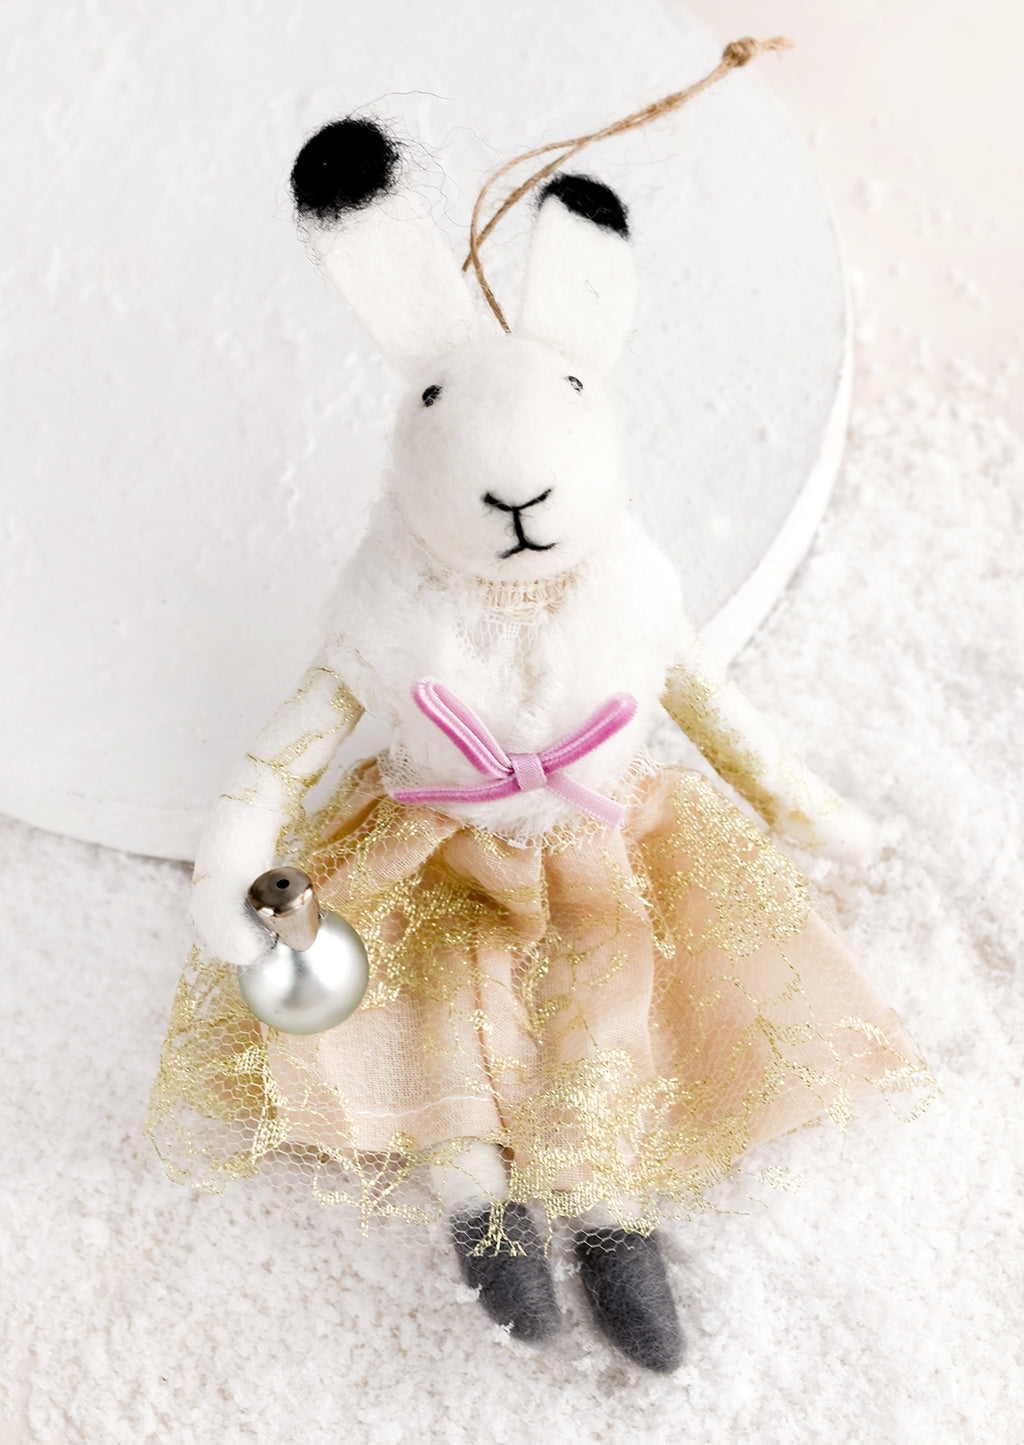 Bell: A felted holiday ornament of a bunny wearing a dress, holding a jingle bell.